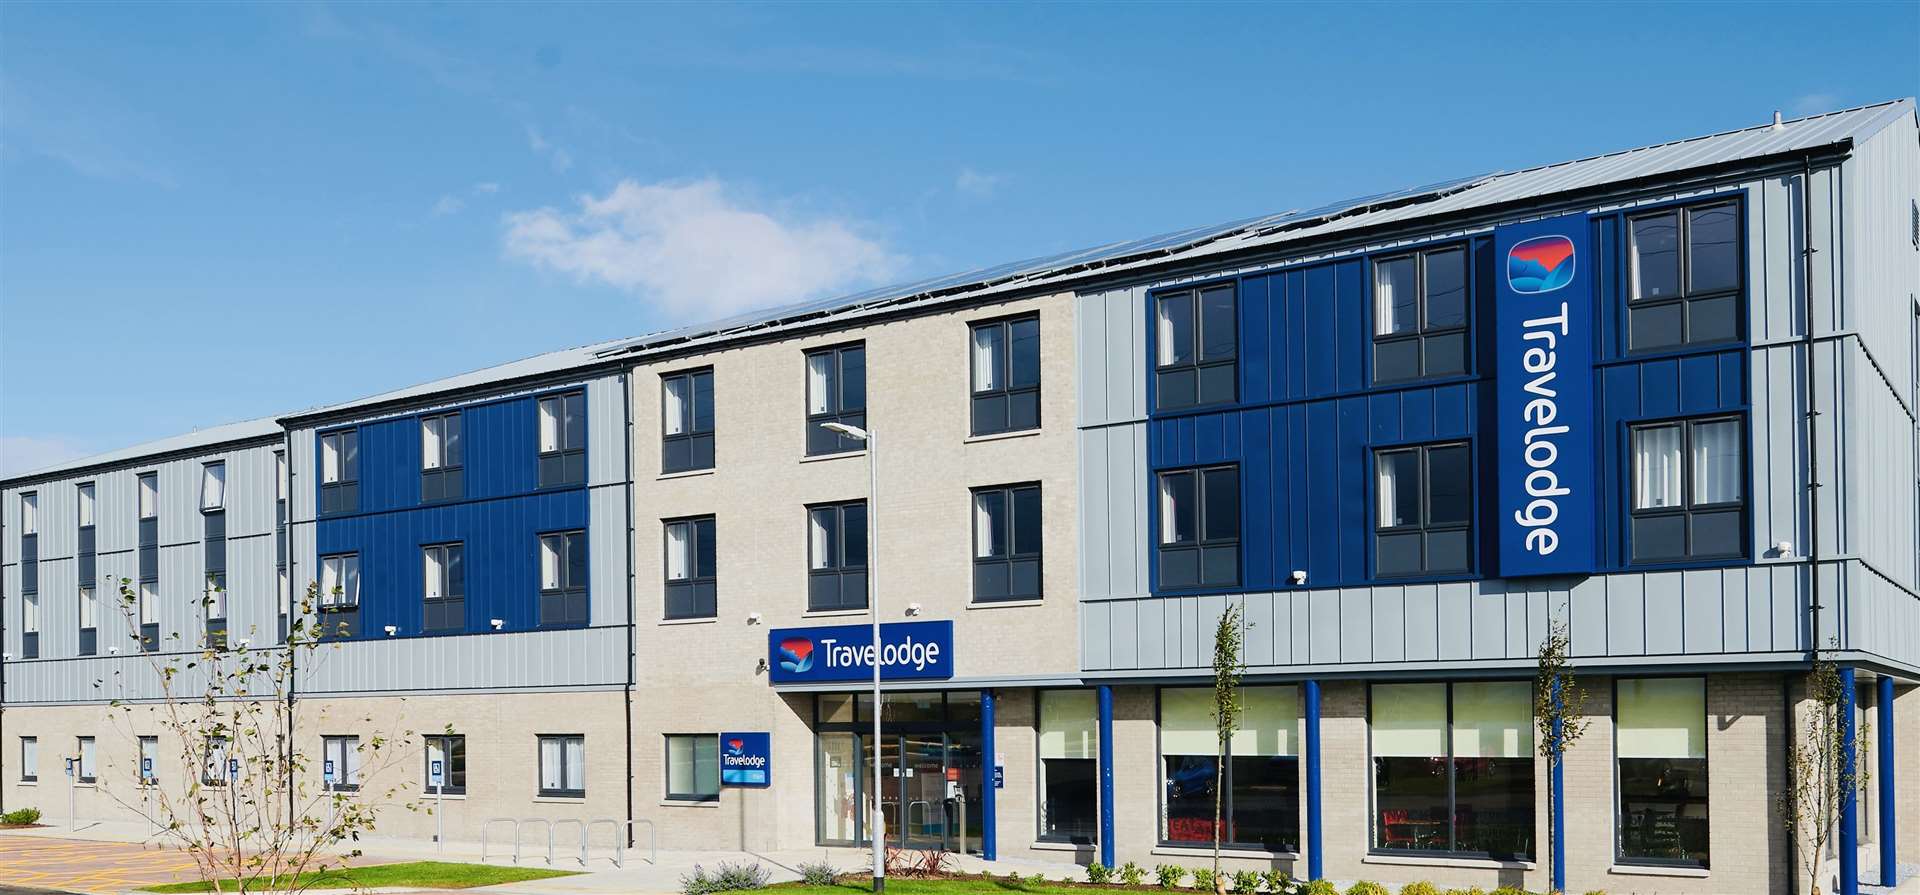 Travelodge Elgin, situated off the A96 on the eastern edge of the town.